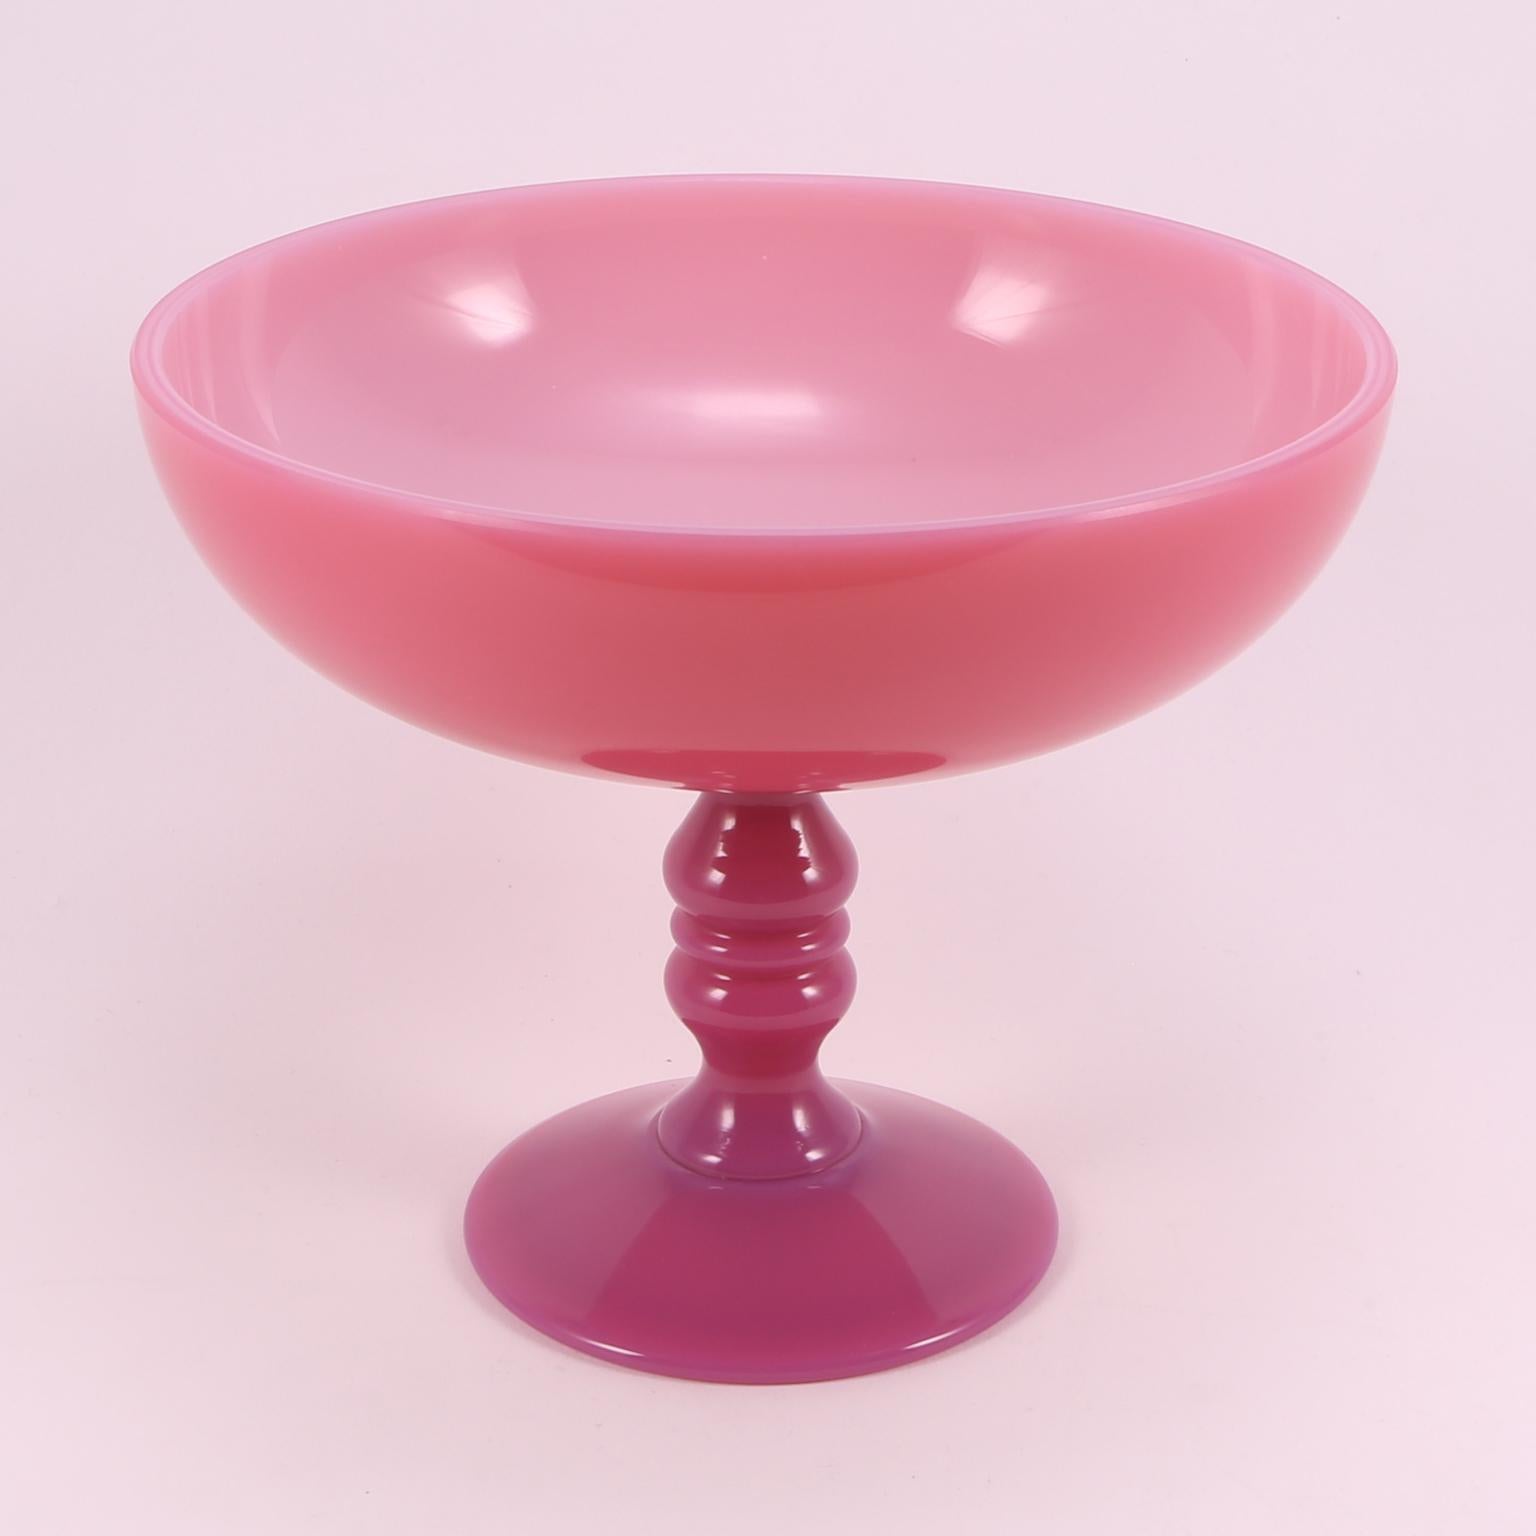 This Cranberry pink opaline centrepiece is a piece of Sèvres that everyone should have in their own collection.
However it is not a common object, rather of rare beauty.
Observing it, you can lose yourself in the many profiles of its stem.
Hand